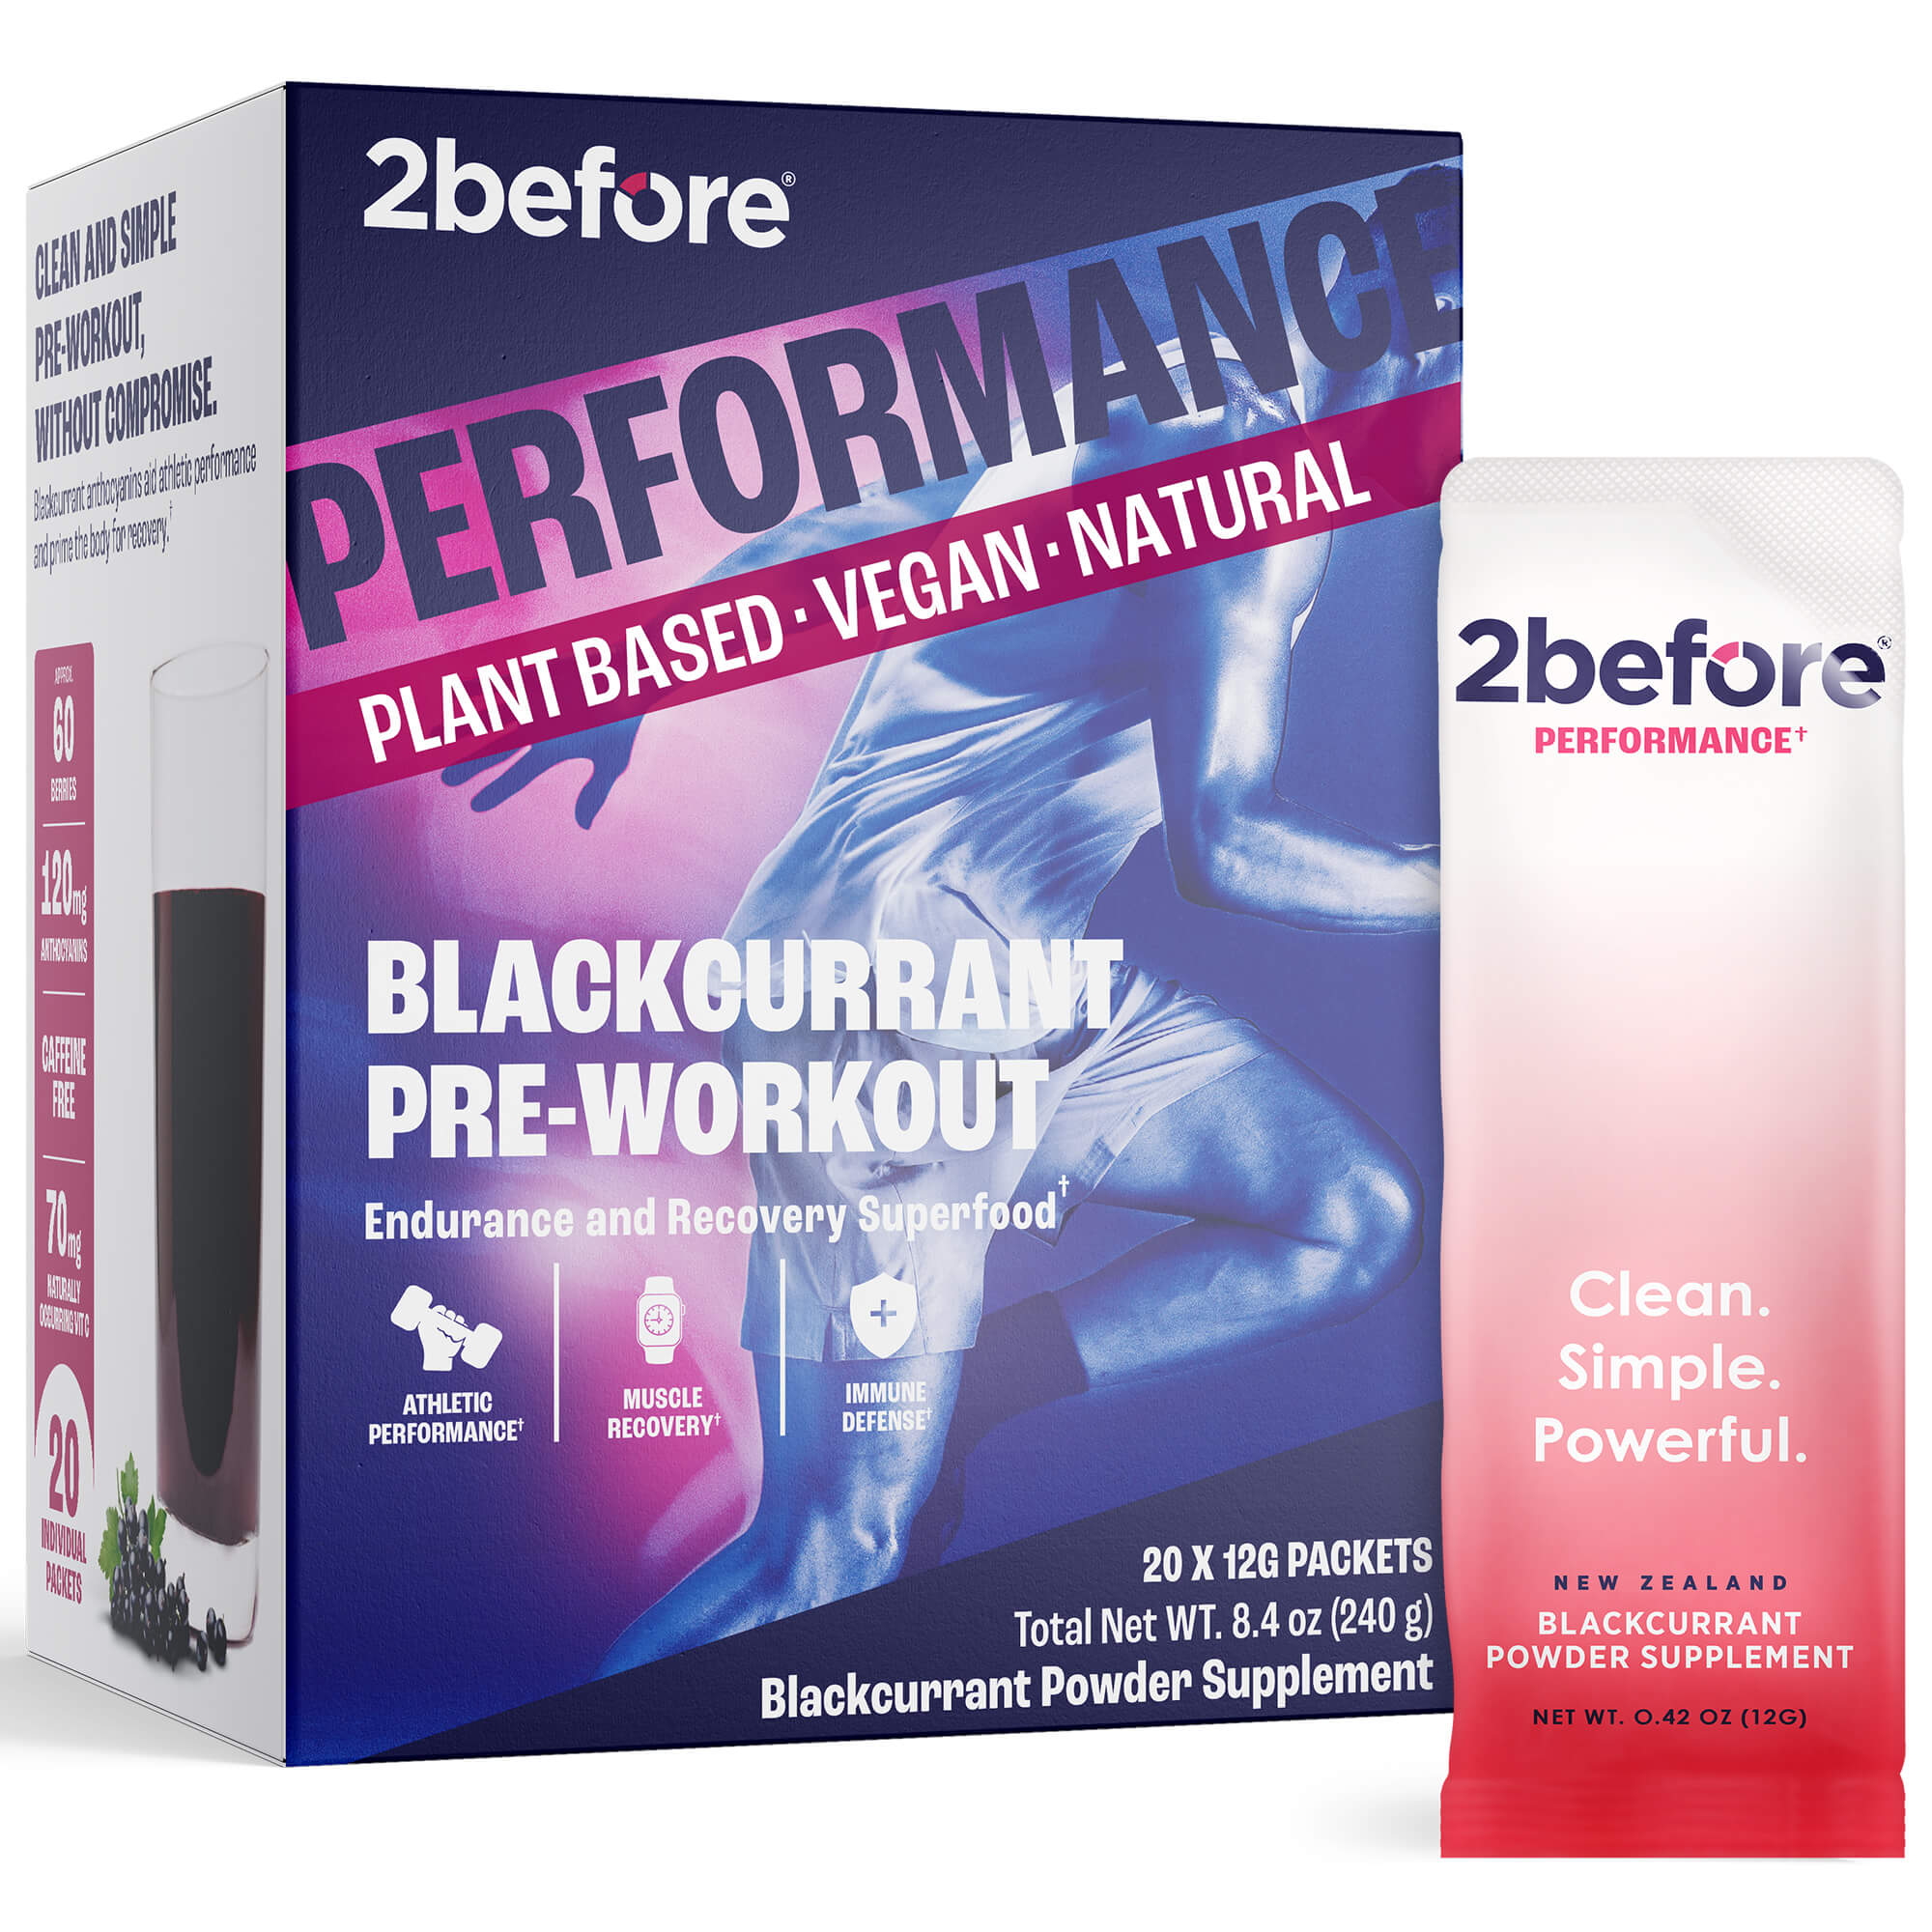 2before blackcurrant pre-workout - caffeine free